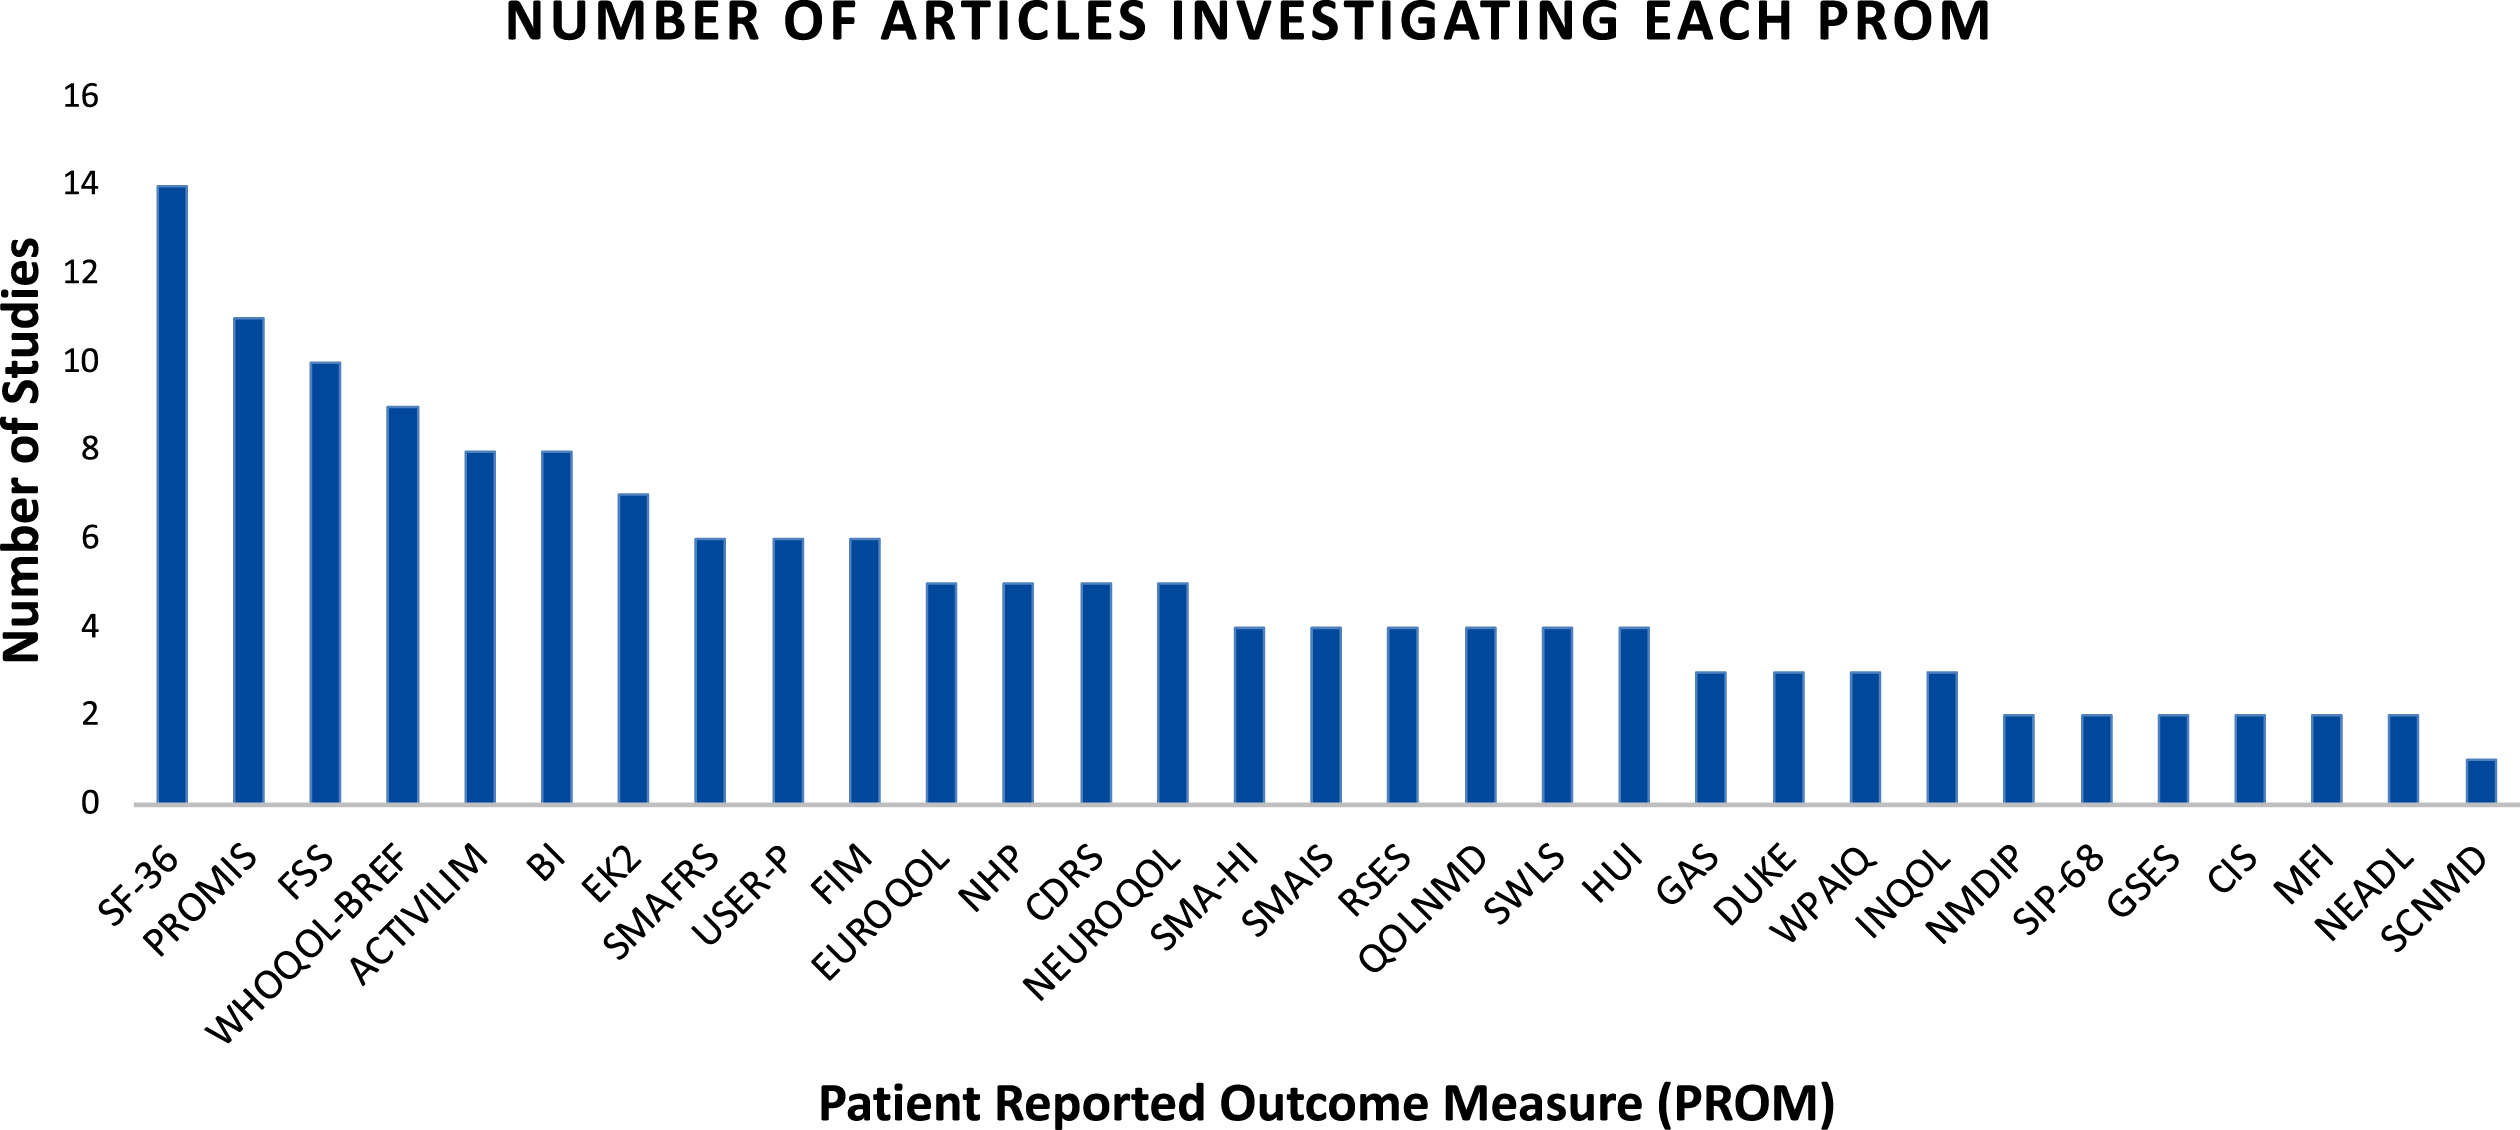 Article Count Bar Chart.SF-36 - Short-Form 36; PROMIS – Patient Reported Outcomes Measurement Information System; FSS – Fatigue Severity Score; ACTIVILIM – Activity Limitation Measure; BI – Barthel Index; EK2 – Egen Klassification 2; SMAFRS – Spinal Muscular Atrophy Functional Rating Scale; USER-P – Utrecht Scale for Evaluation of Rehabilitation Participation; FIM – Functional Independence Measure; EUROQOL – EUROQOL 5D/5L Measure; NHP – Nottingham Health Profile; CDRS – Connor Davidson Resiliency Scale 10; SMA-HI – Spinal Muscular Atrophy Health Index; SMAIS – Spinal Muscular Atrophy Independence Scale; RSES – Rosenberg Self-Esteem Scale; QOLNMD – Quality of Life Neuromuscular Disorders; SWLS – Satisfaction with Life Scale; HUI – Health Utility Index 3; GAS – Goal Attainment Scale; DUKE – Duke Health Profile; WPAIQ – Work Productivity and Activity Impairment Questionnaire; INQOL – Individualized Neuromuscular Quality of Life Questionnaire; NMDIP – Neuromuscular Disease Impact Profile; SIP-68 – Sickness Impact Profile 68; GSES – General Self Efficacy Scale; CIS – Checklist of Individual Strength; MFI – Multidimensional Fatigue Inventory; NEADL – Nottingham Extended Activities of Daily Living Scale; SCNMD – Self-Care in Motor Neuron Disease Index.